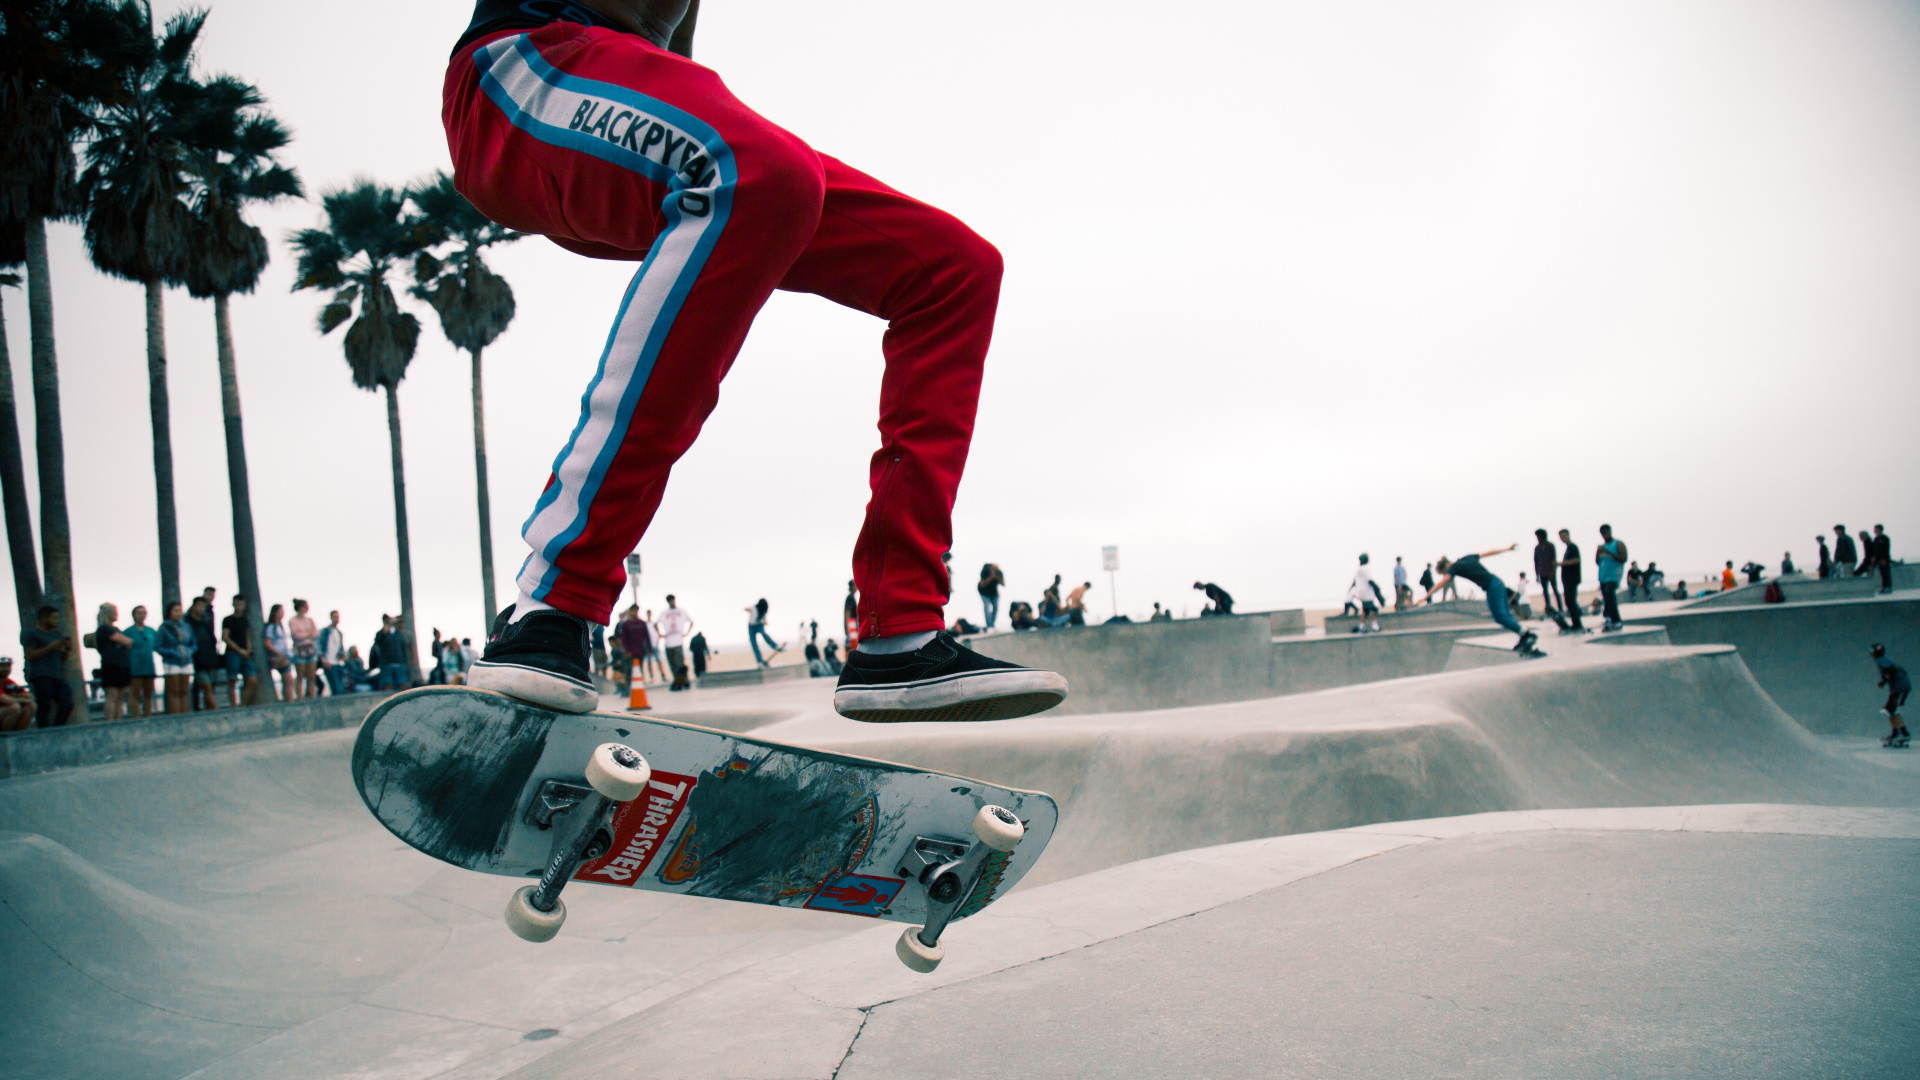 Man in Red Pants and Black and White Sneakers Riding Skateboard. Wallpaper in 1920x1080 Resolution